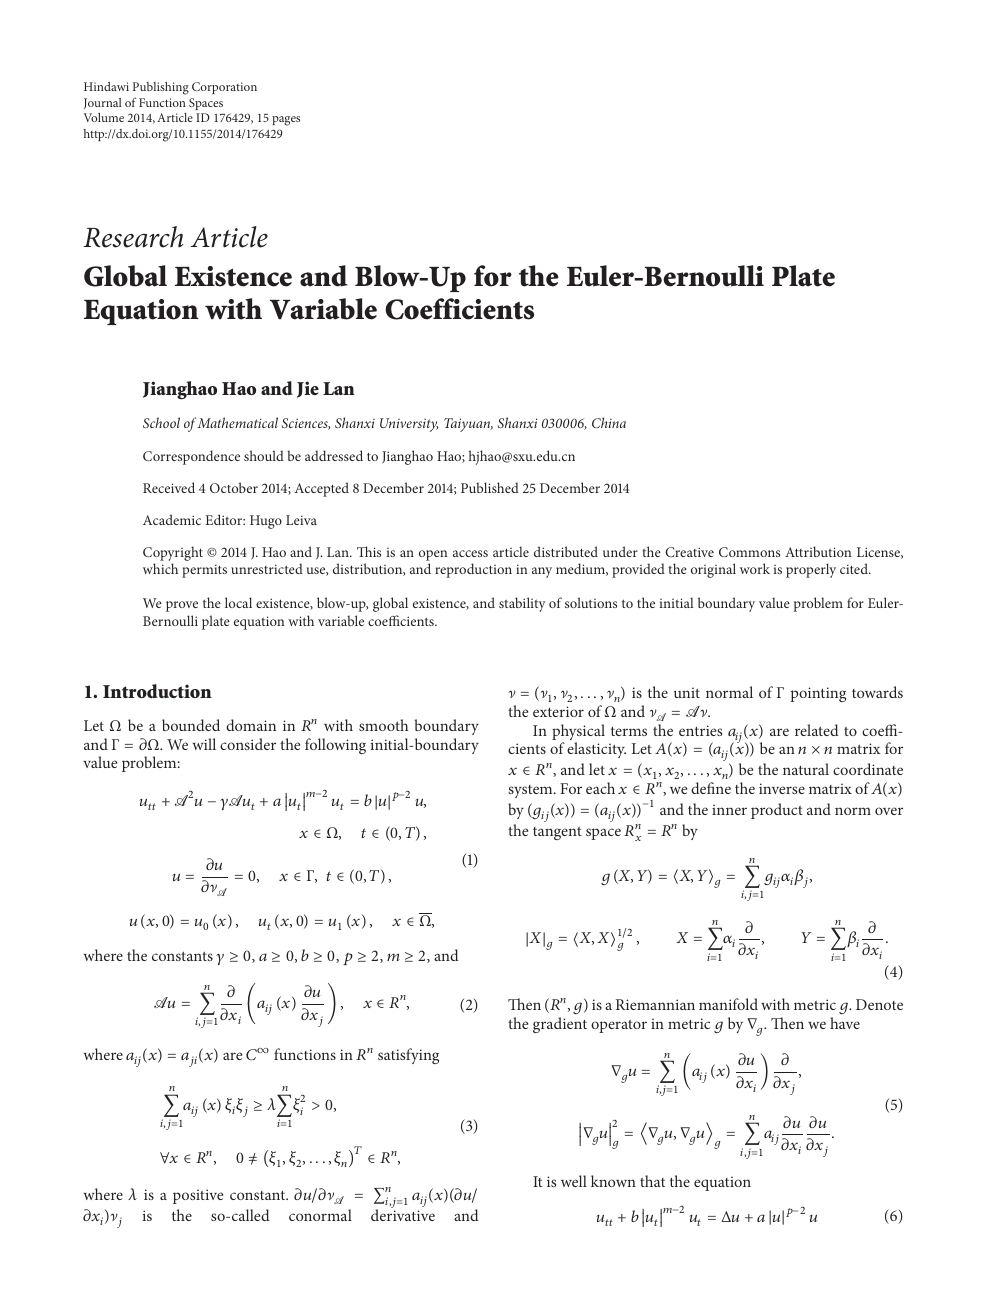 Global Existence And Blow Up For The Euler Bernoulli Plate Equation With Variable Coefficients Topic Of Research Paper In Mathematics Download Scholarly Article Pdf And Read For Free On Cyberleninka Open Science Hub